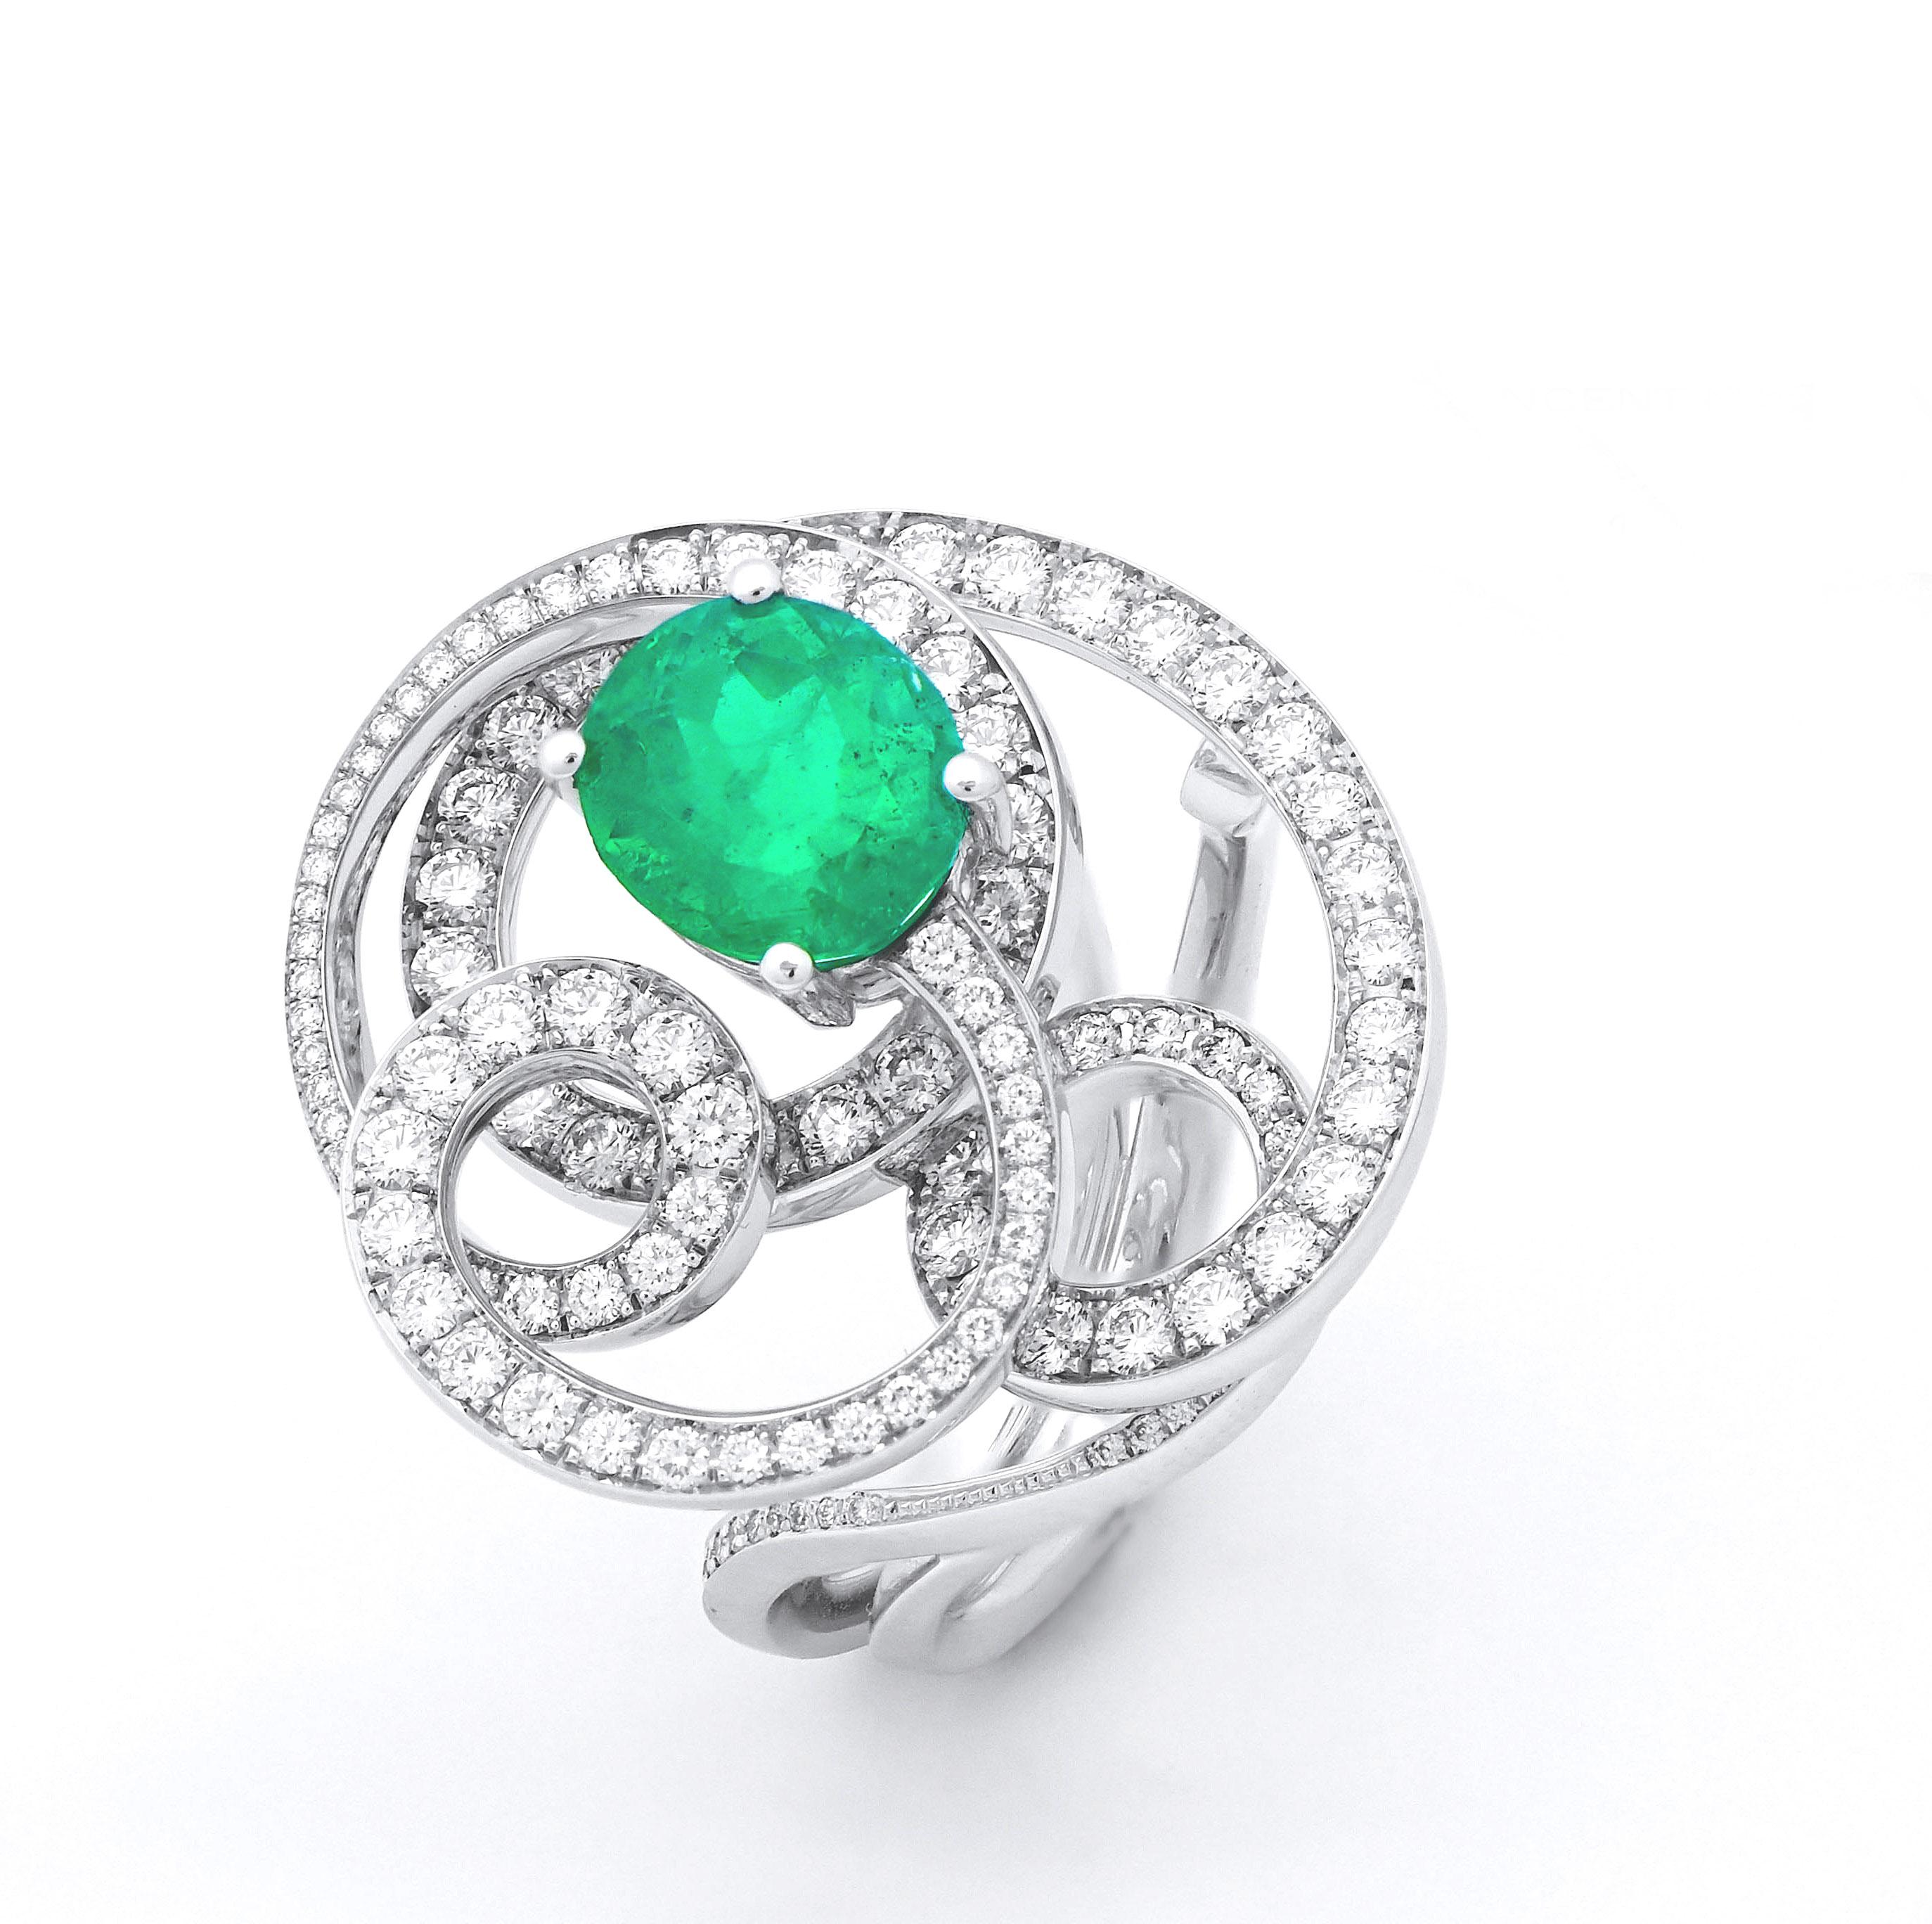 A unique piece of fine jewelry, in 750 white gold set with a 2.51cts (Minor) oval Colombian emerald (GRS certificate), and 126 top-quality EF/IF-VVS natural diamonds. This ring is entirely handcrafted, using traditional jewelry-making methods, in